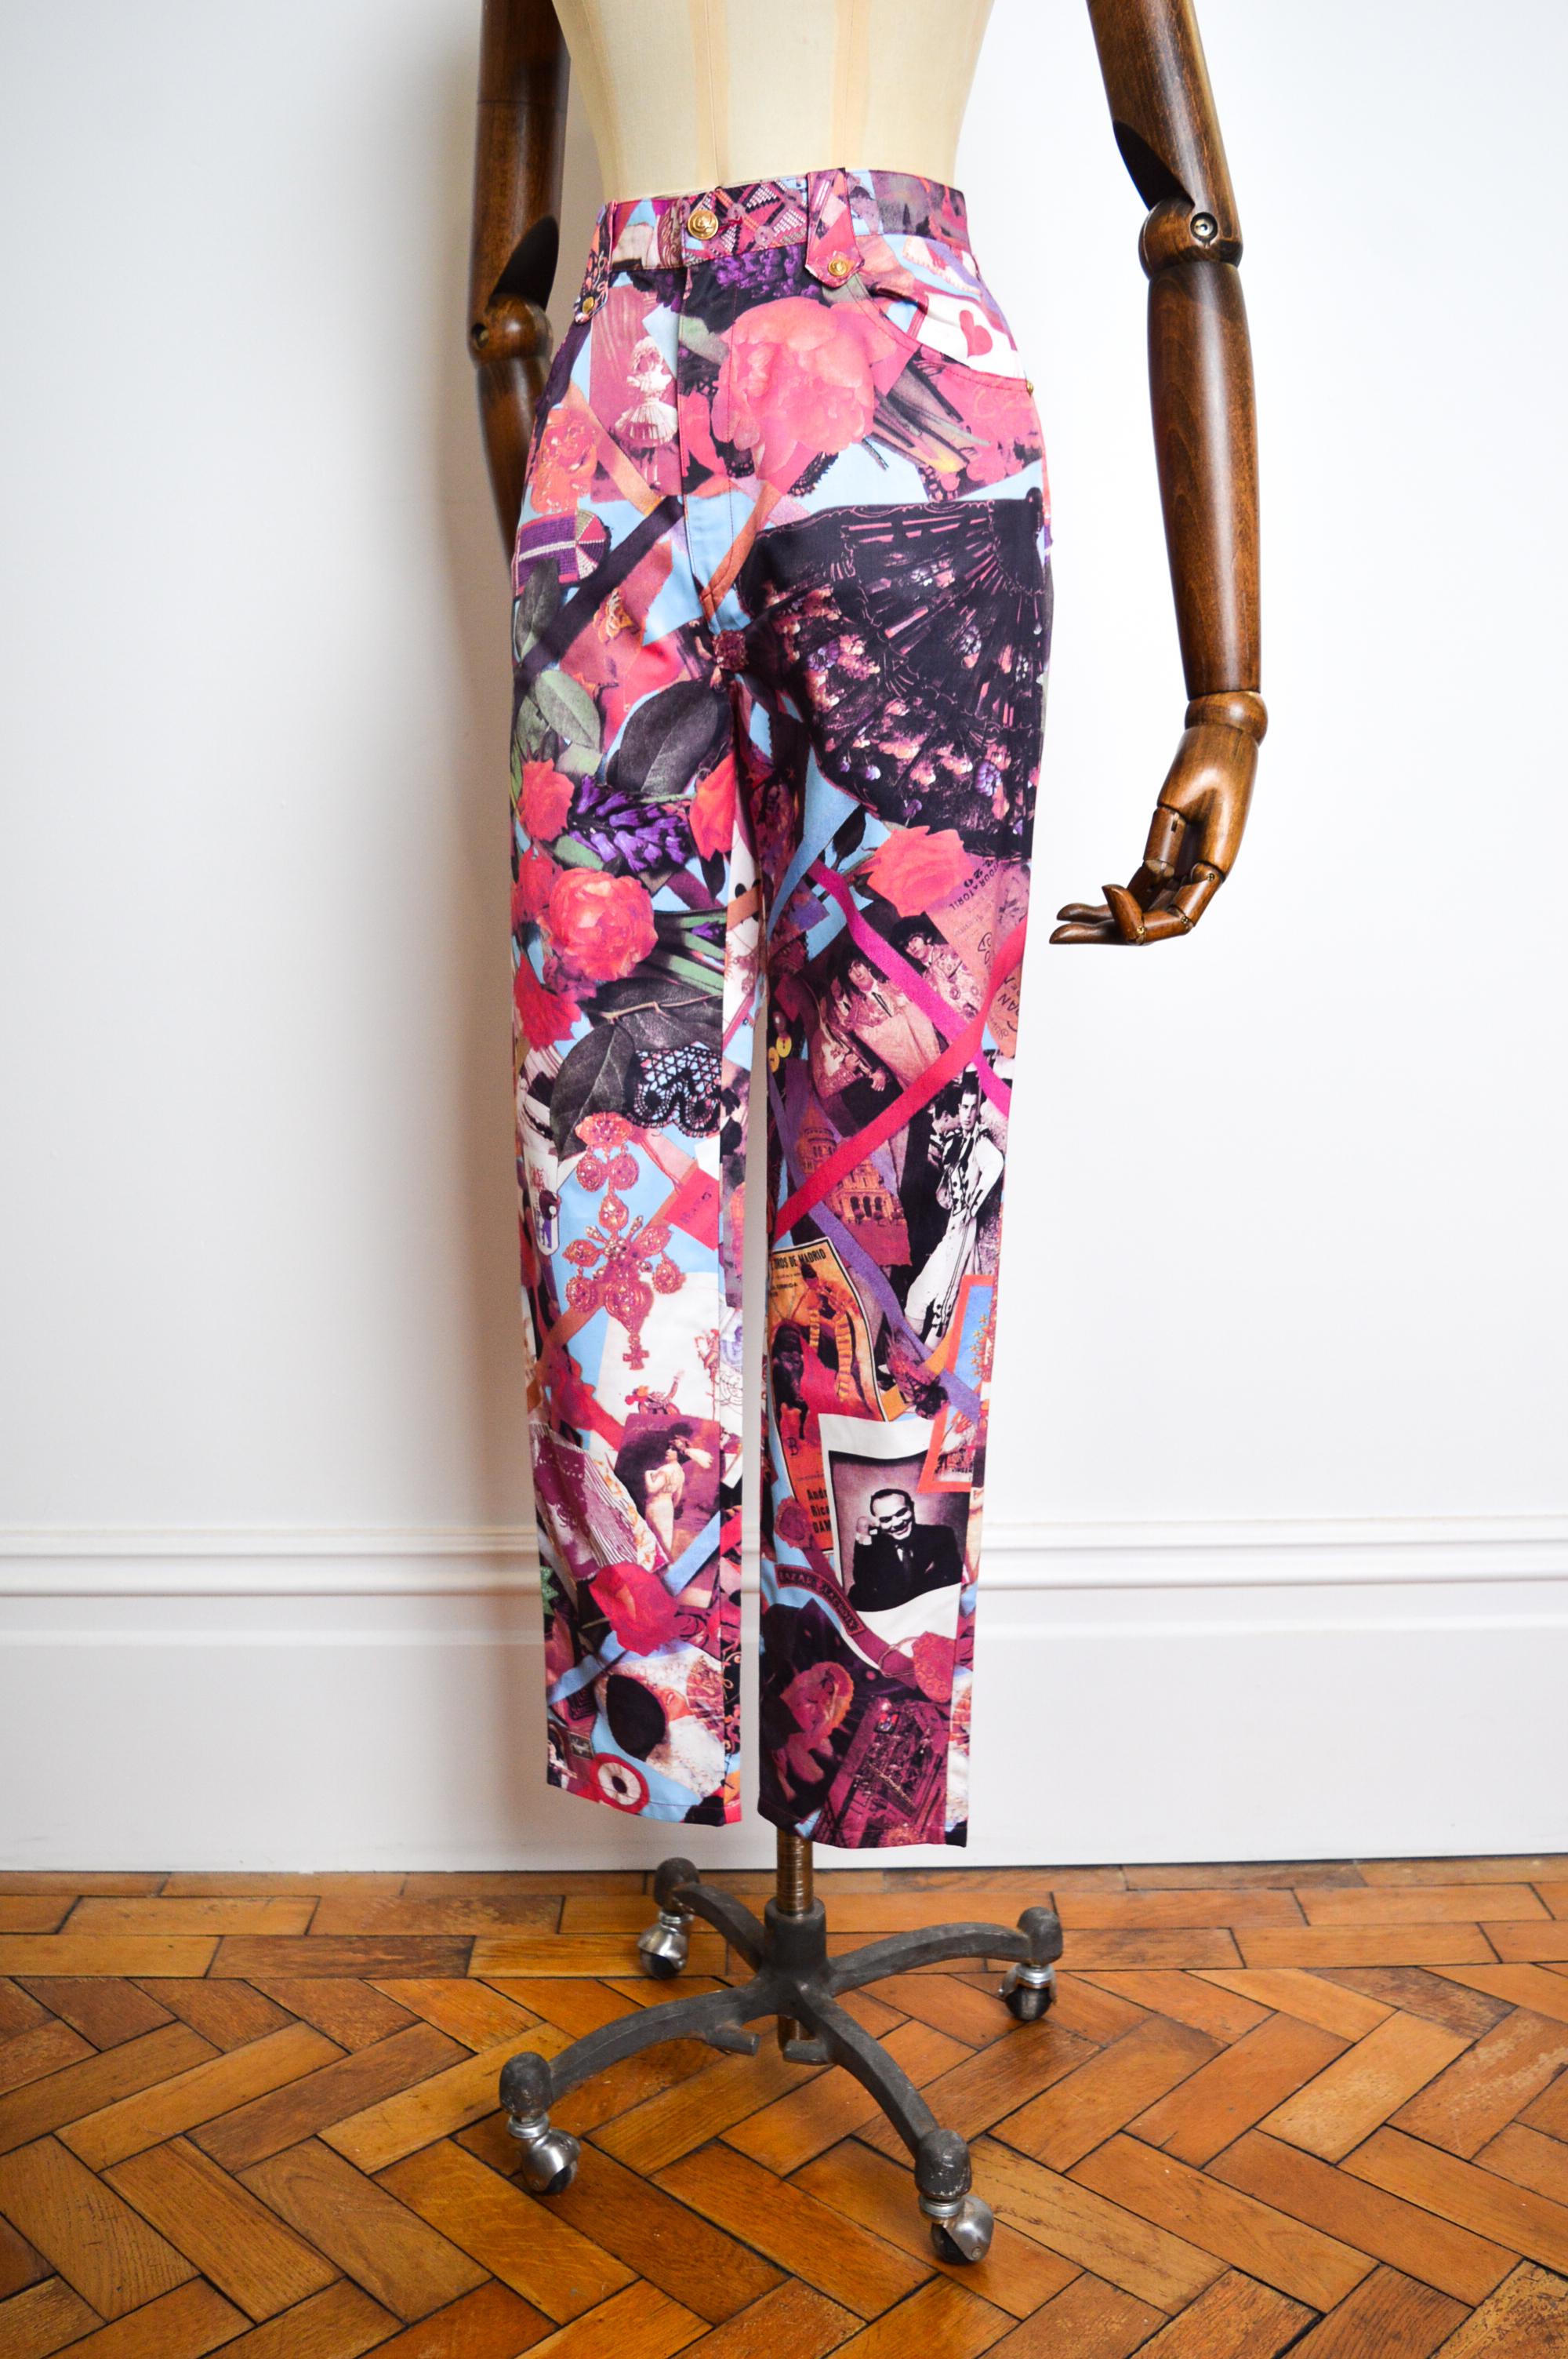 90s Vintage Christian Lacroix Hot Pink High Waisted Photograph Print Jeans Pants 5